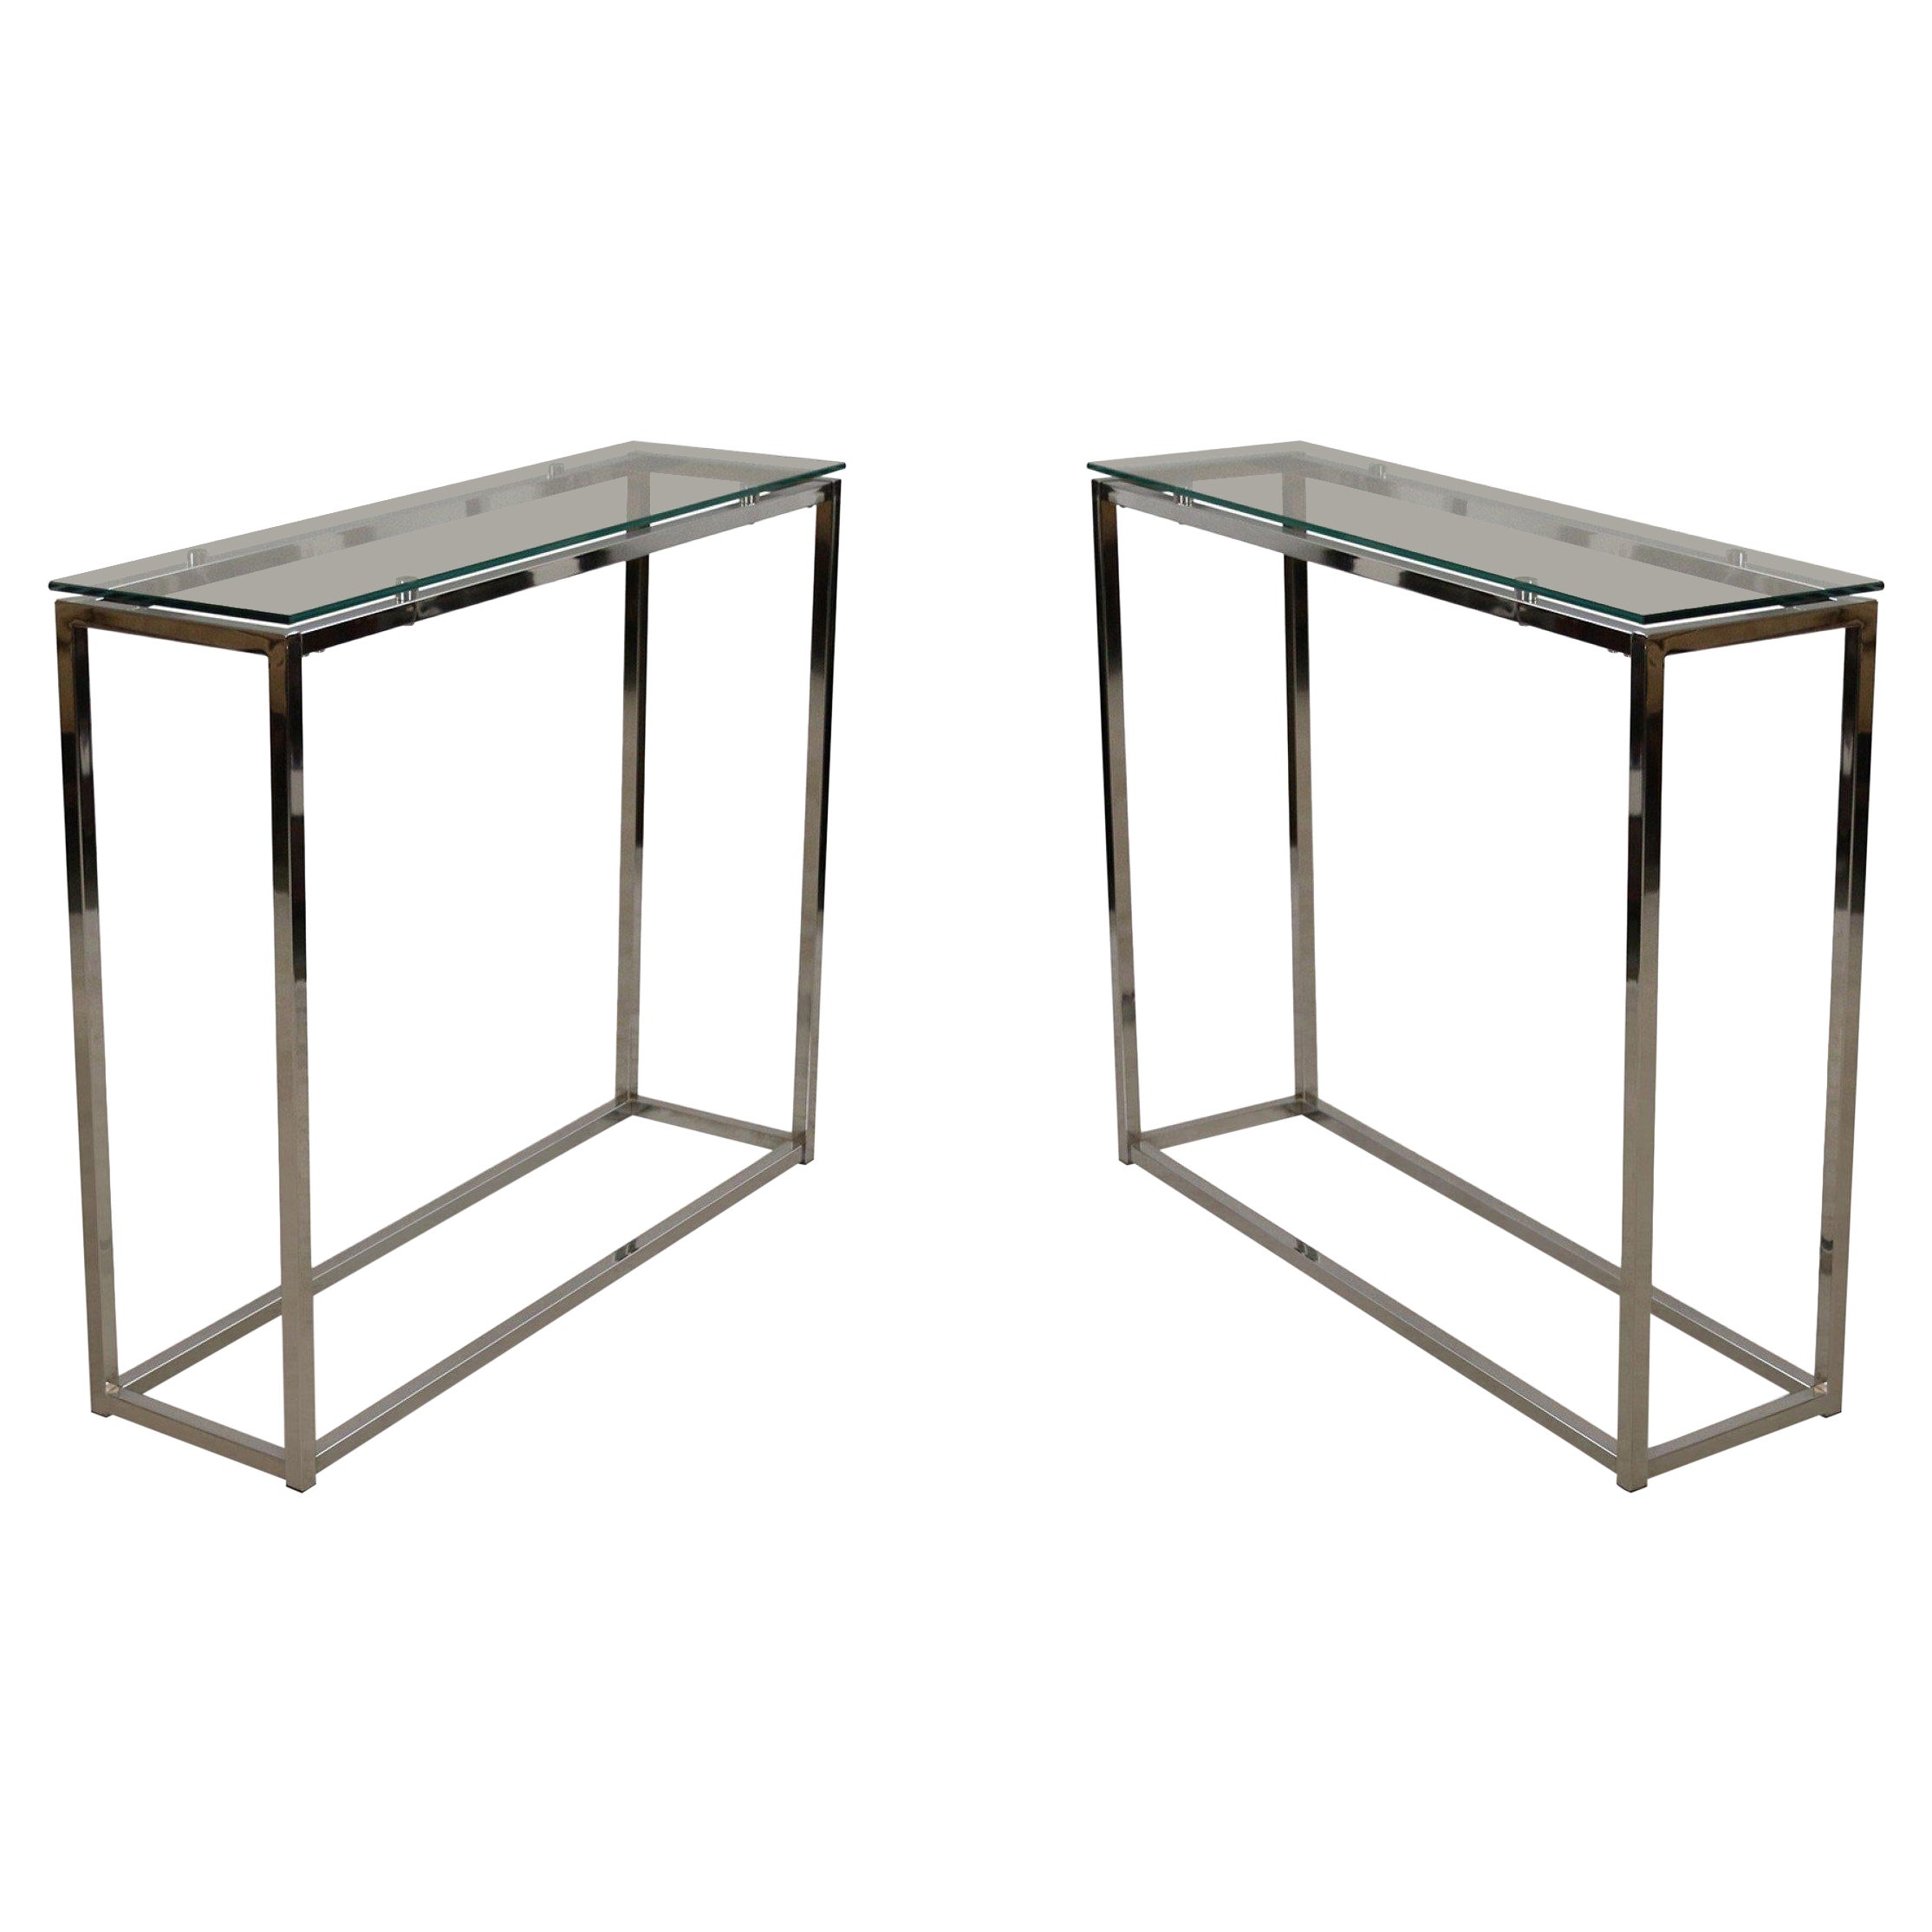 Pair of Contemporary Silver Metal and Glass Narrow Console Tables